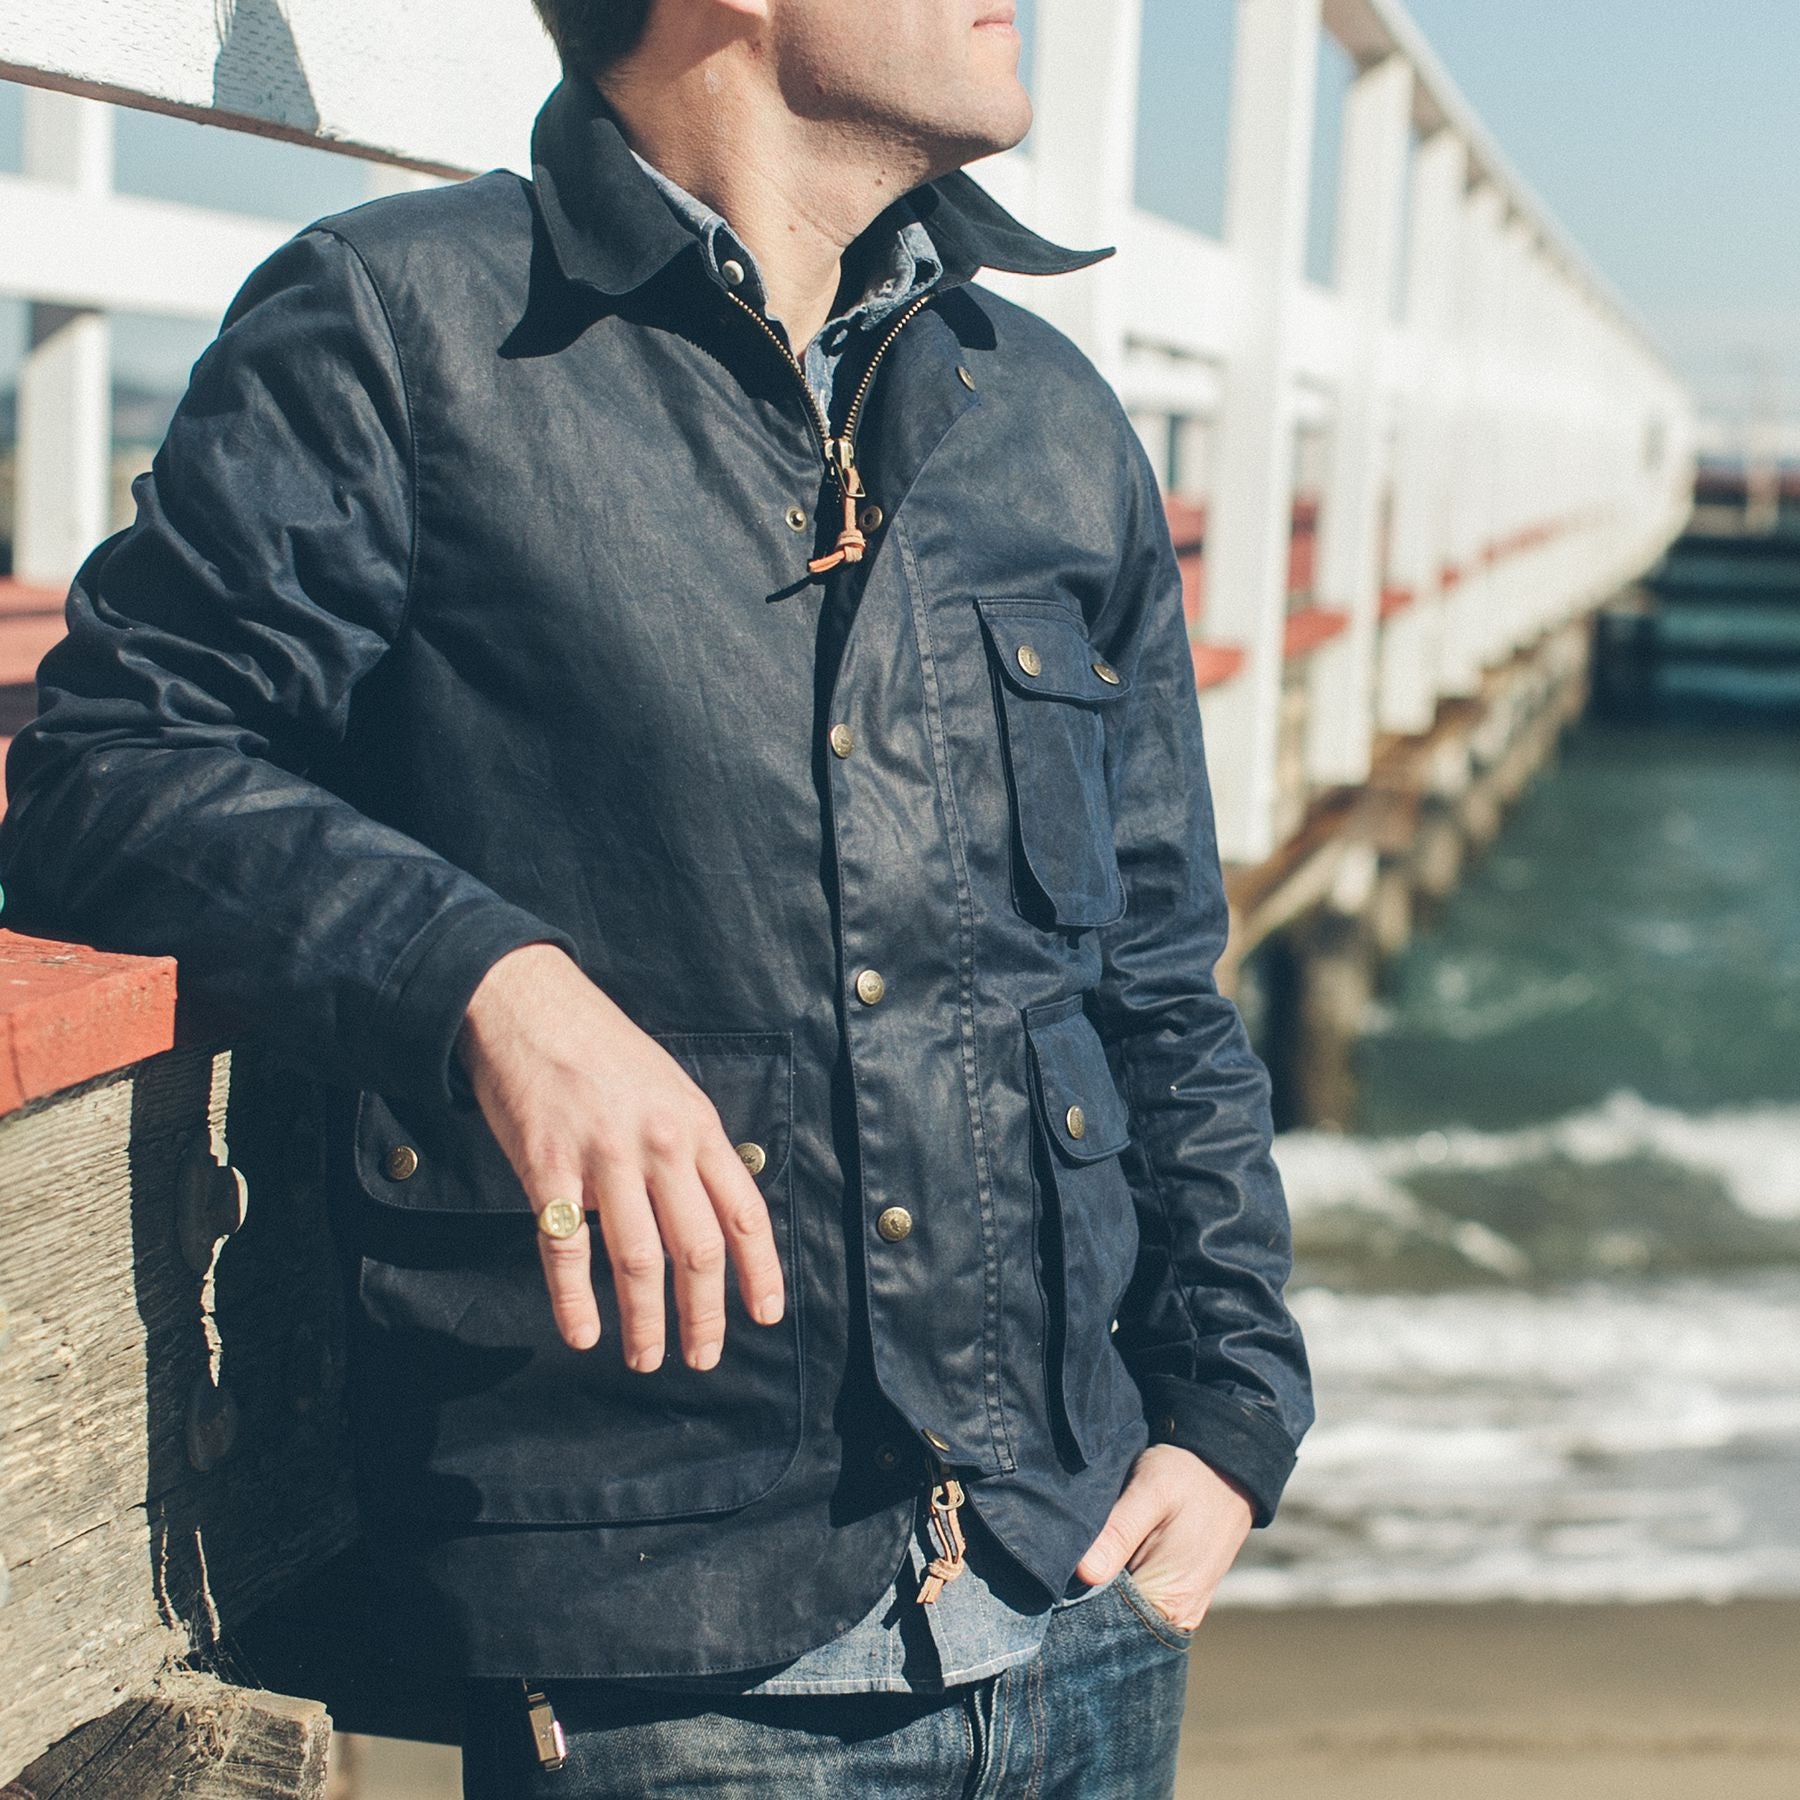 taylor stitch rover jacket review